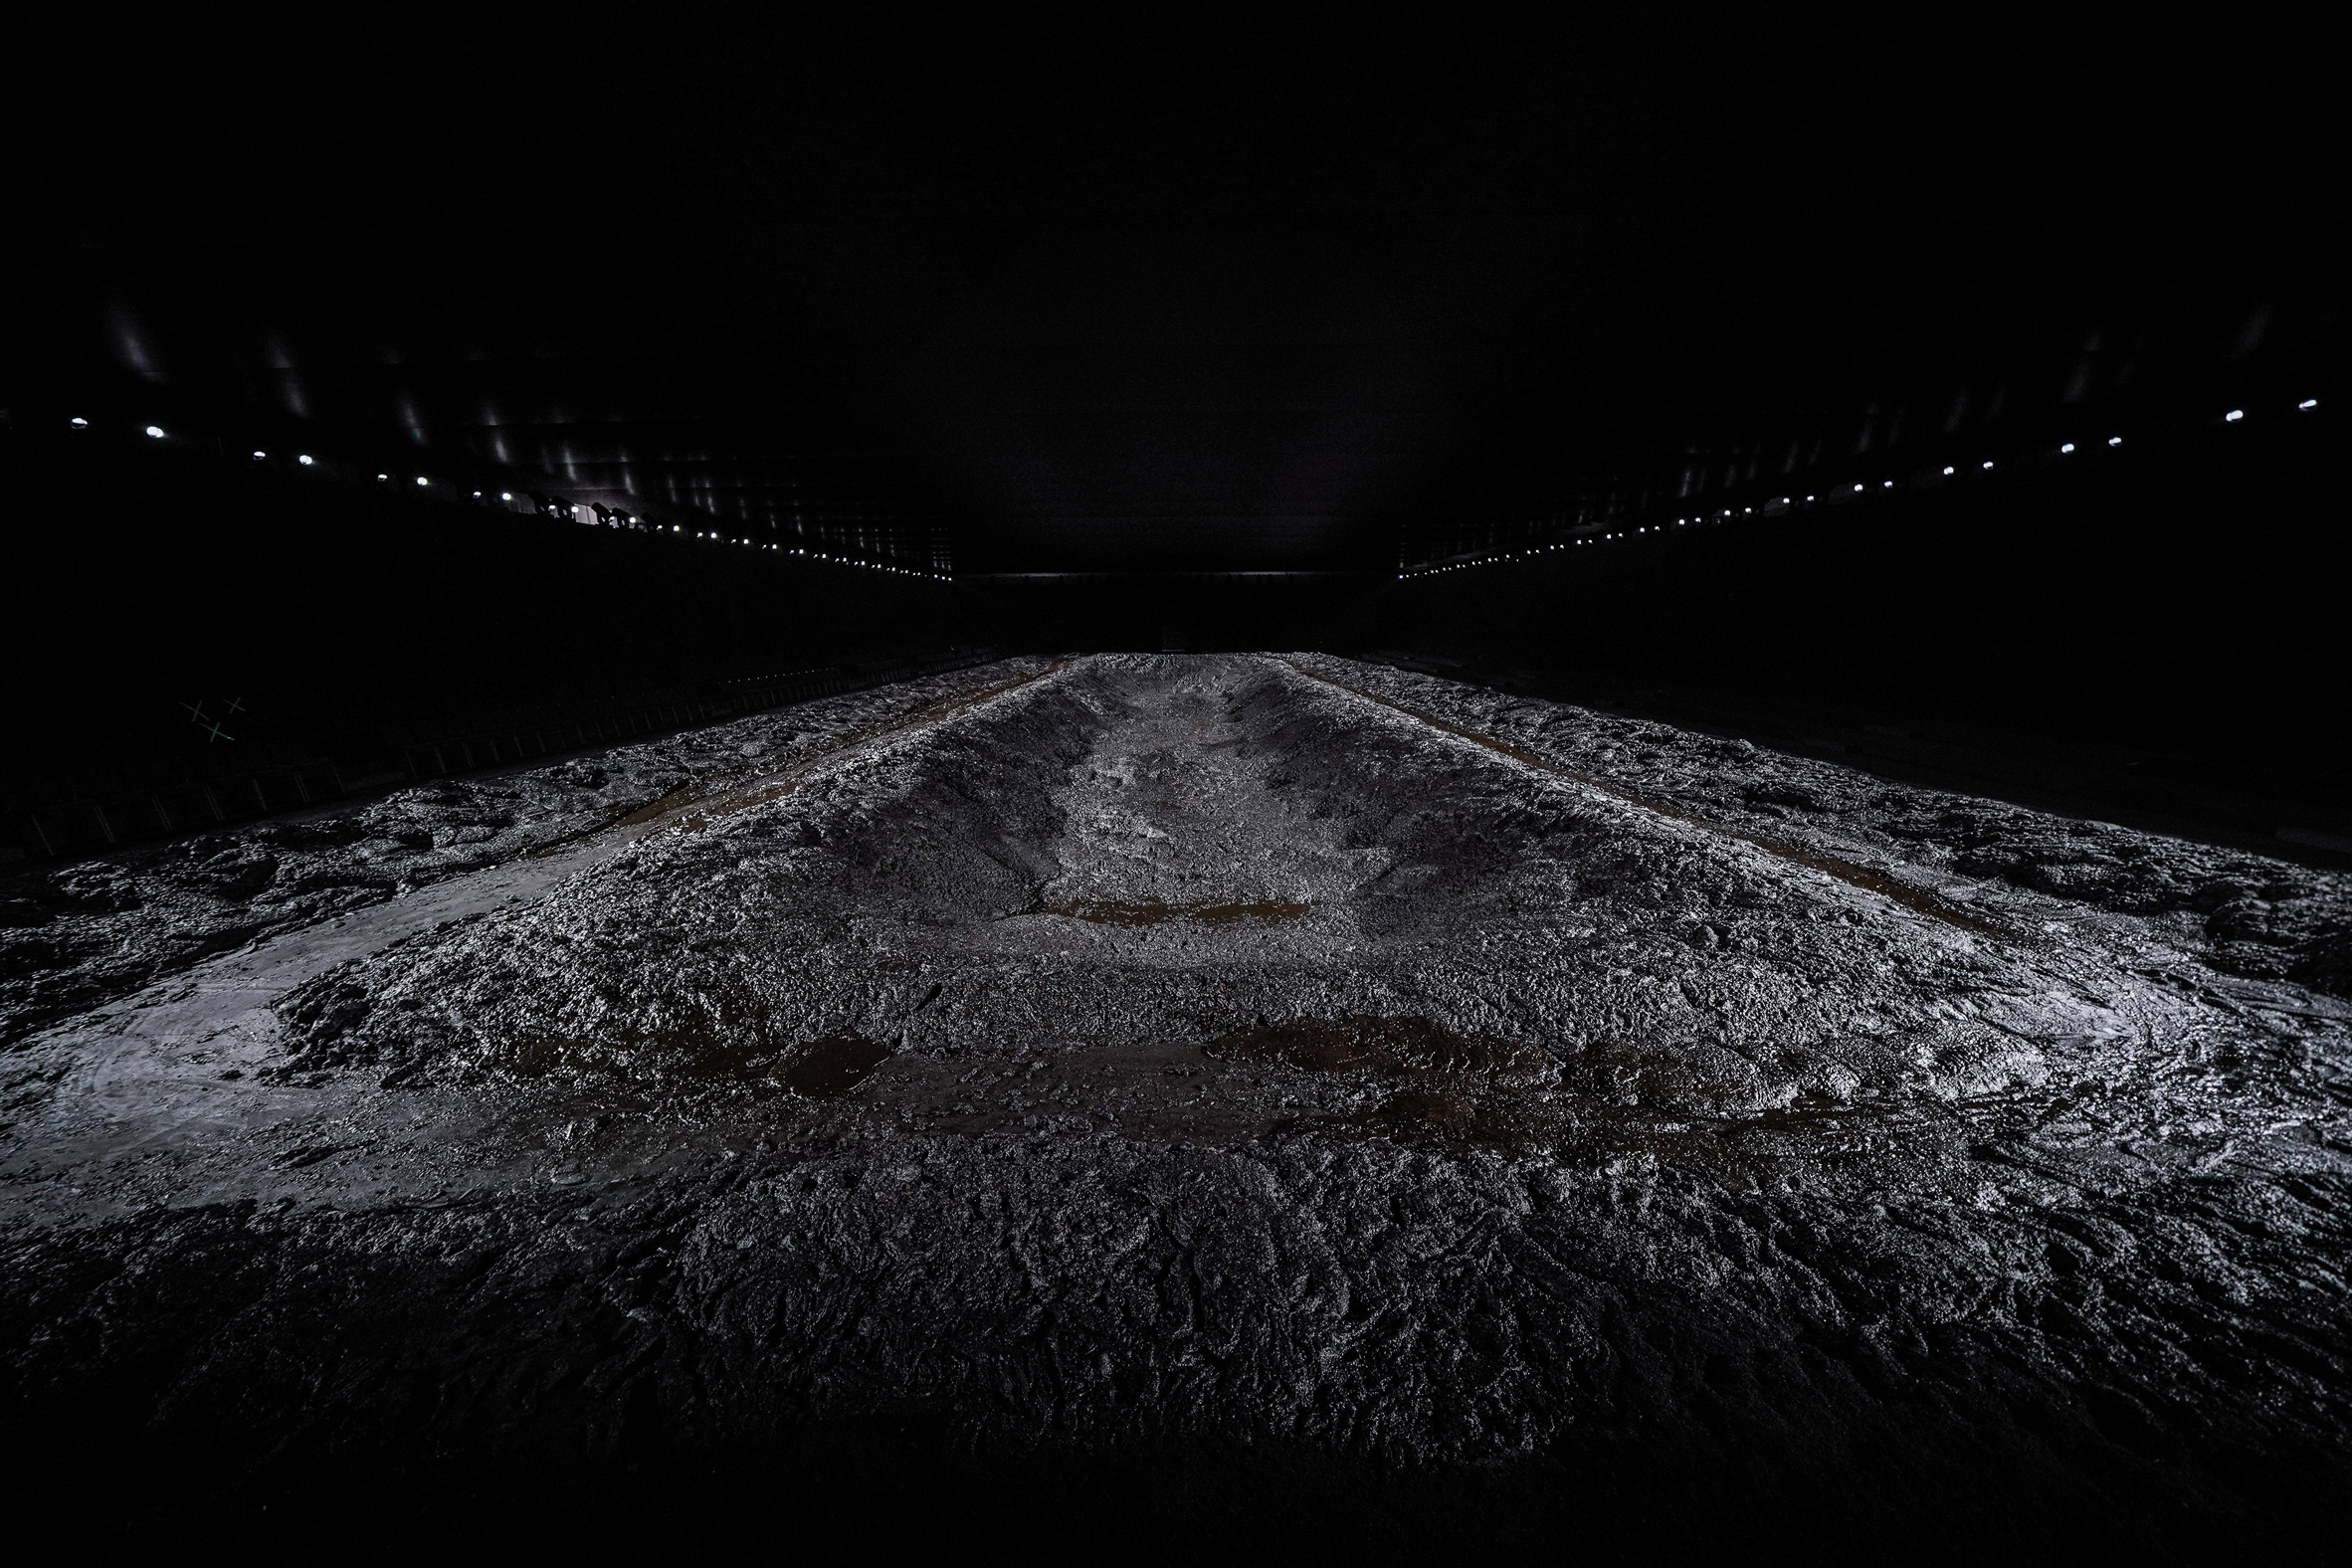 Image of the carved out runway at the Balenciaga show